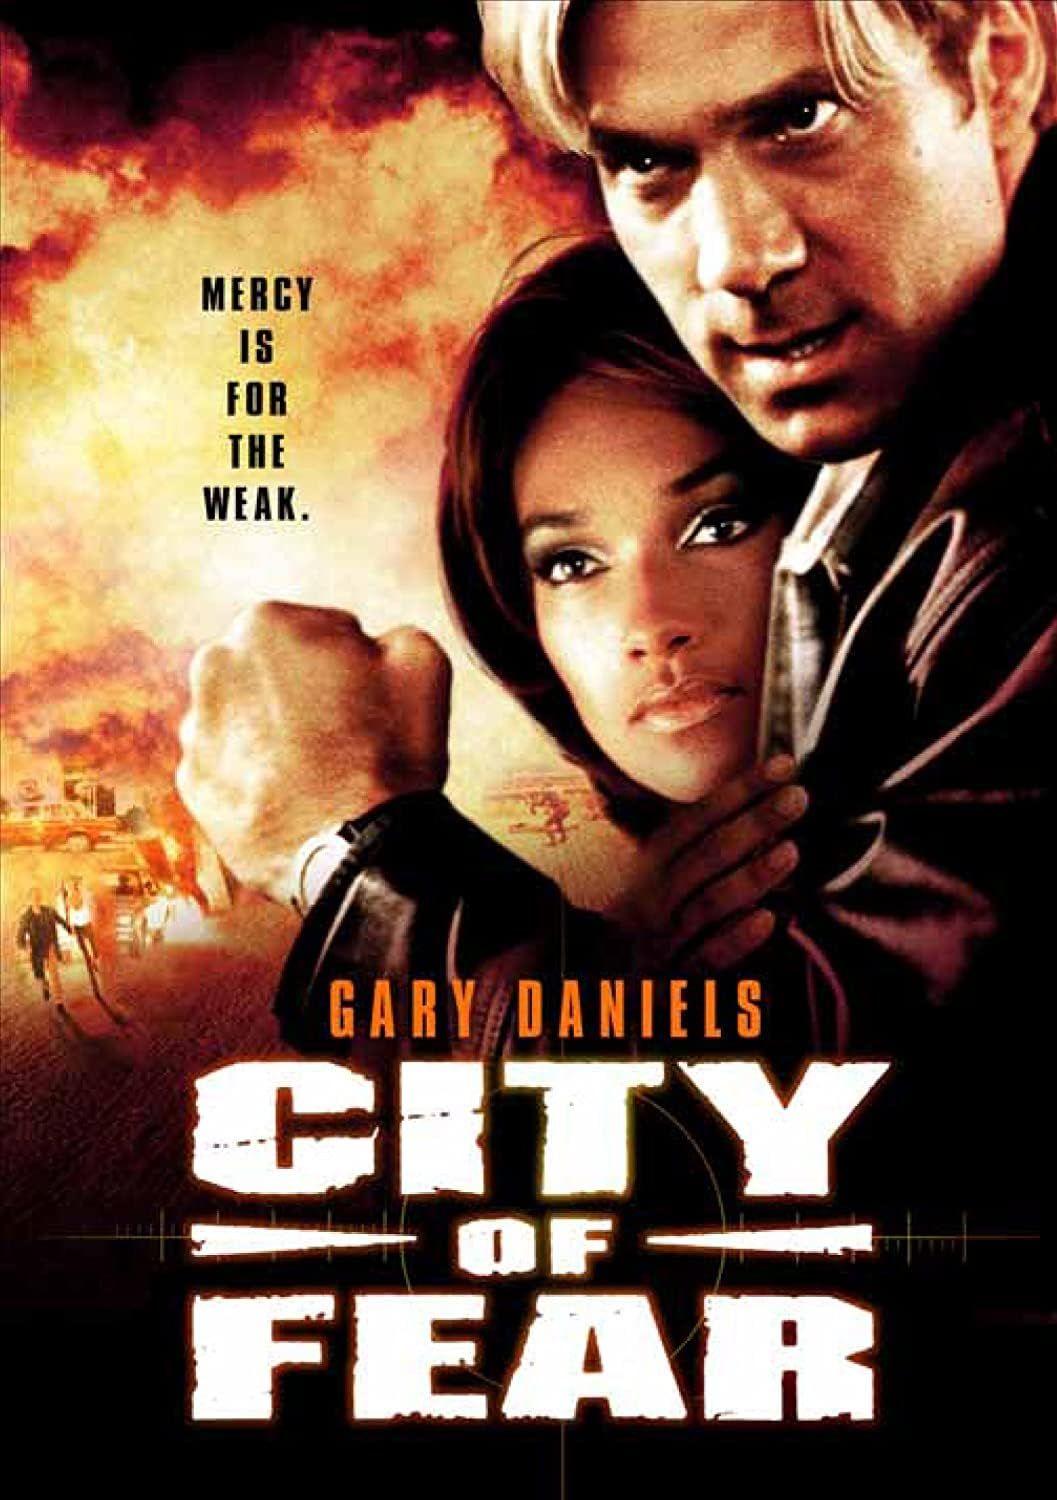 City of Fear (2000) Hindi Dubbed Movie download full movie